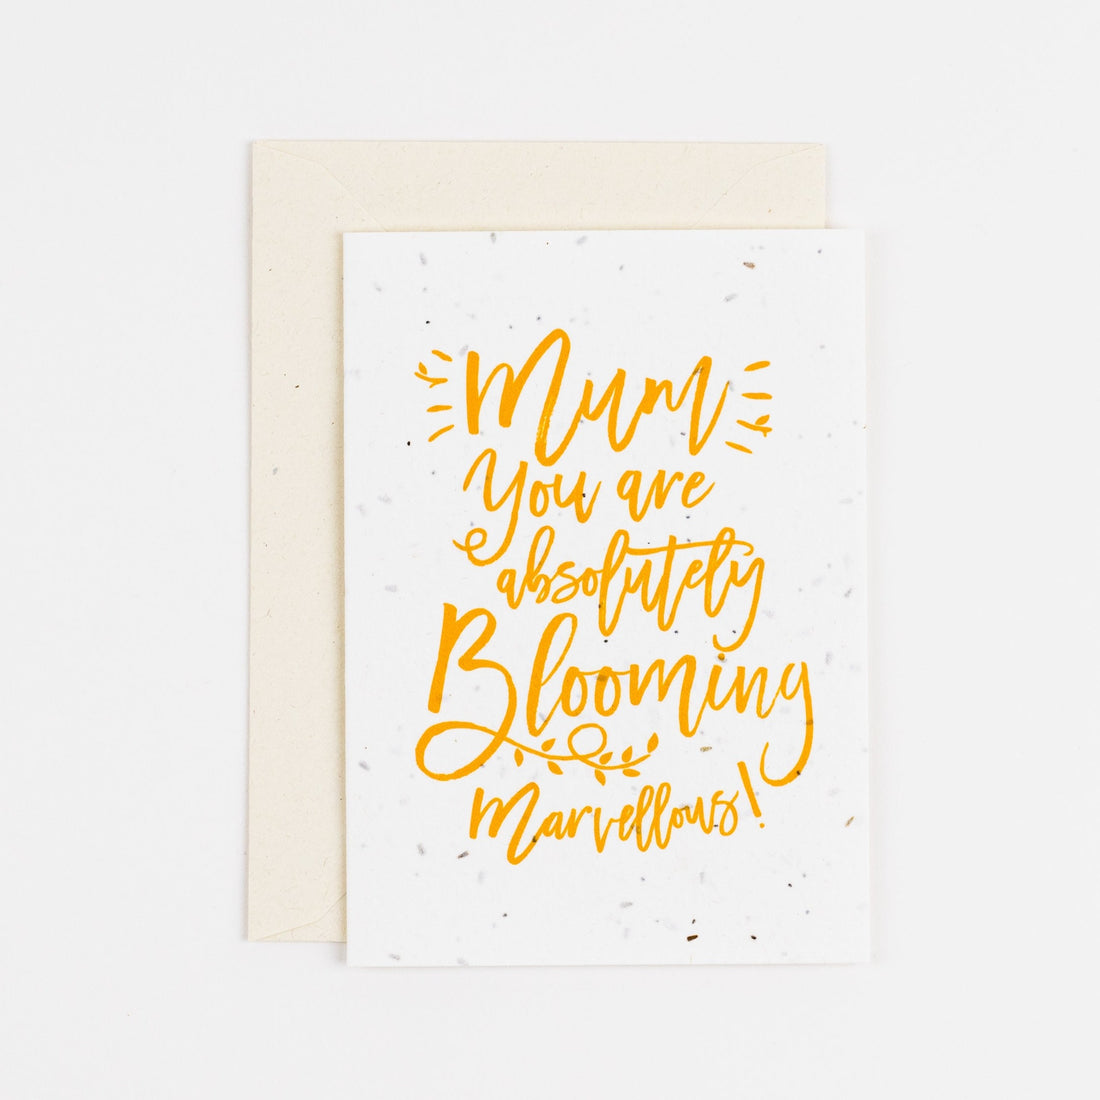 mum you are absolutely blooming marvellous plantable card in yellow